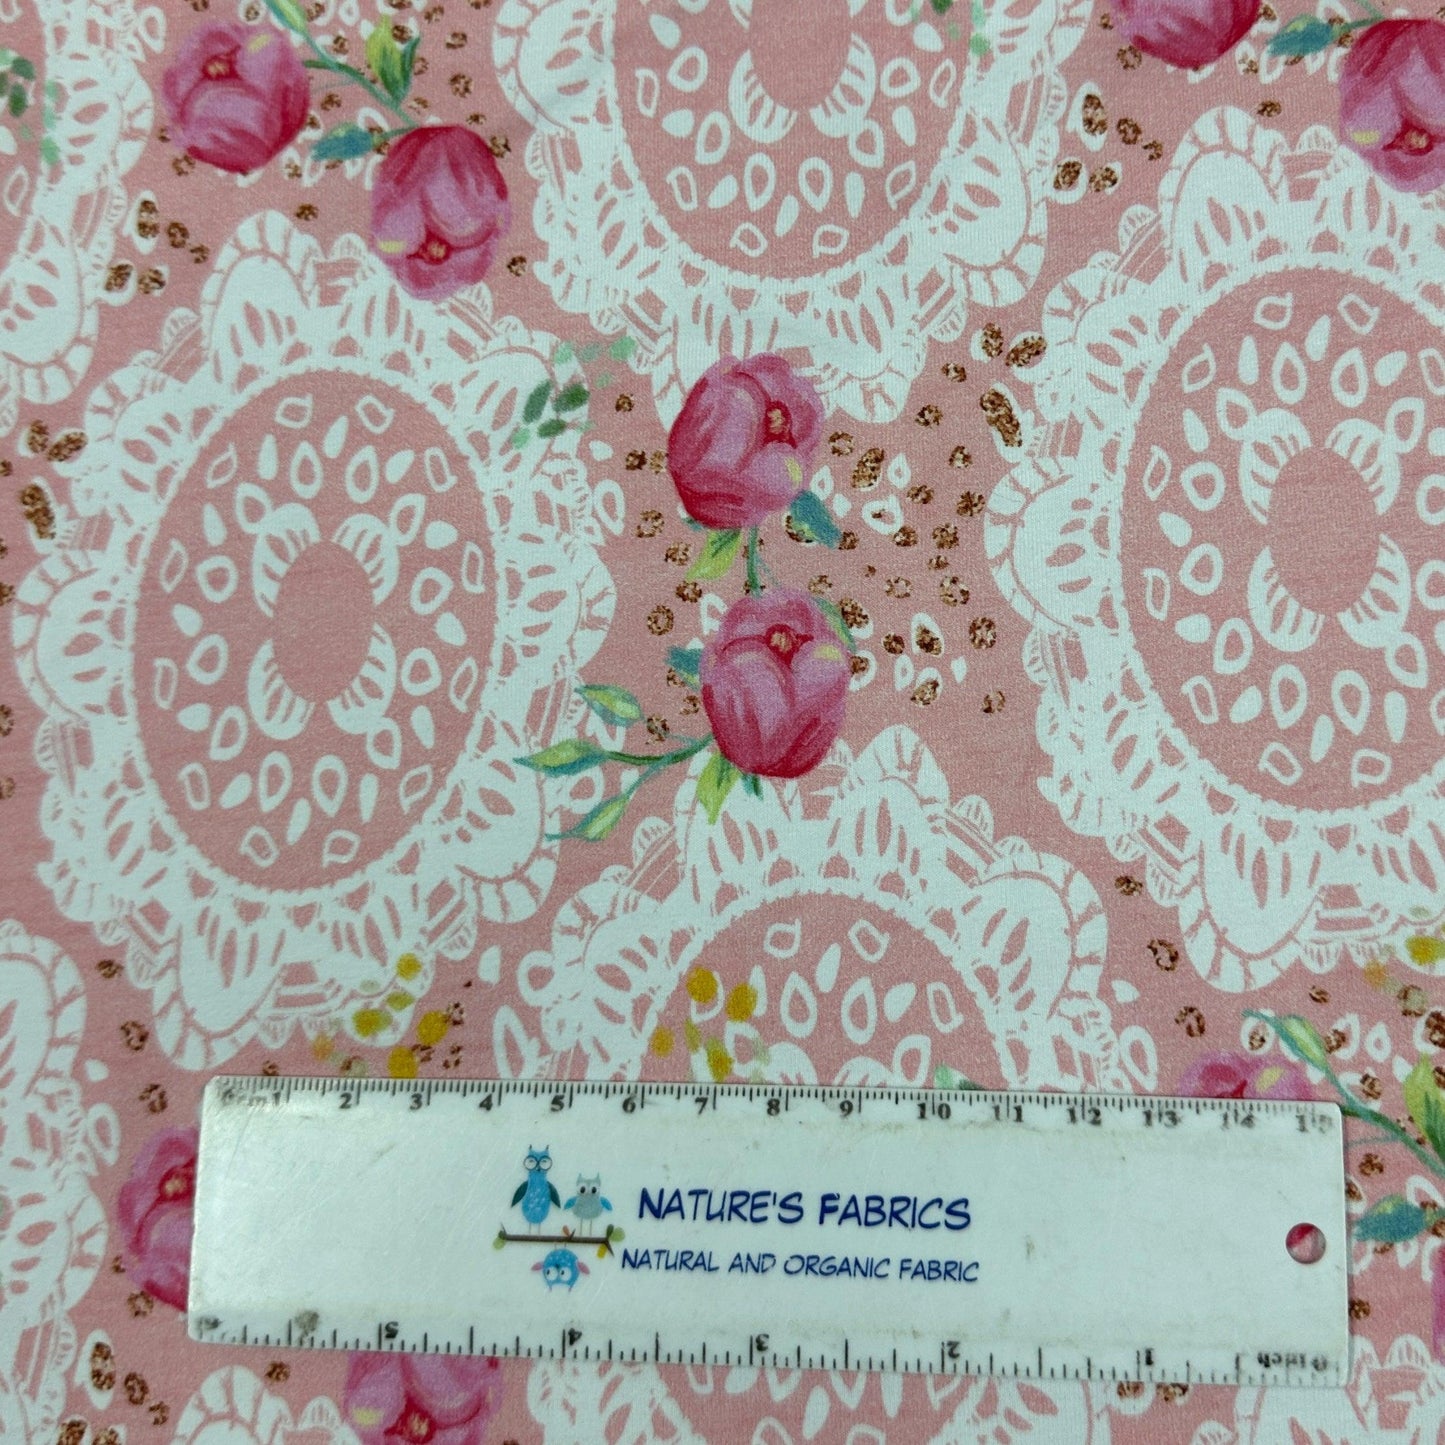 Pink and White Floral on Cotton/Spandex Jersey Fabric - Nature's Fabrics